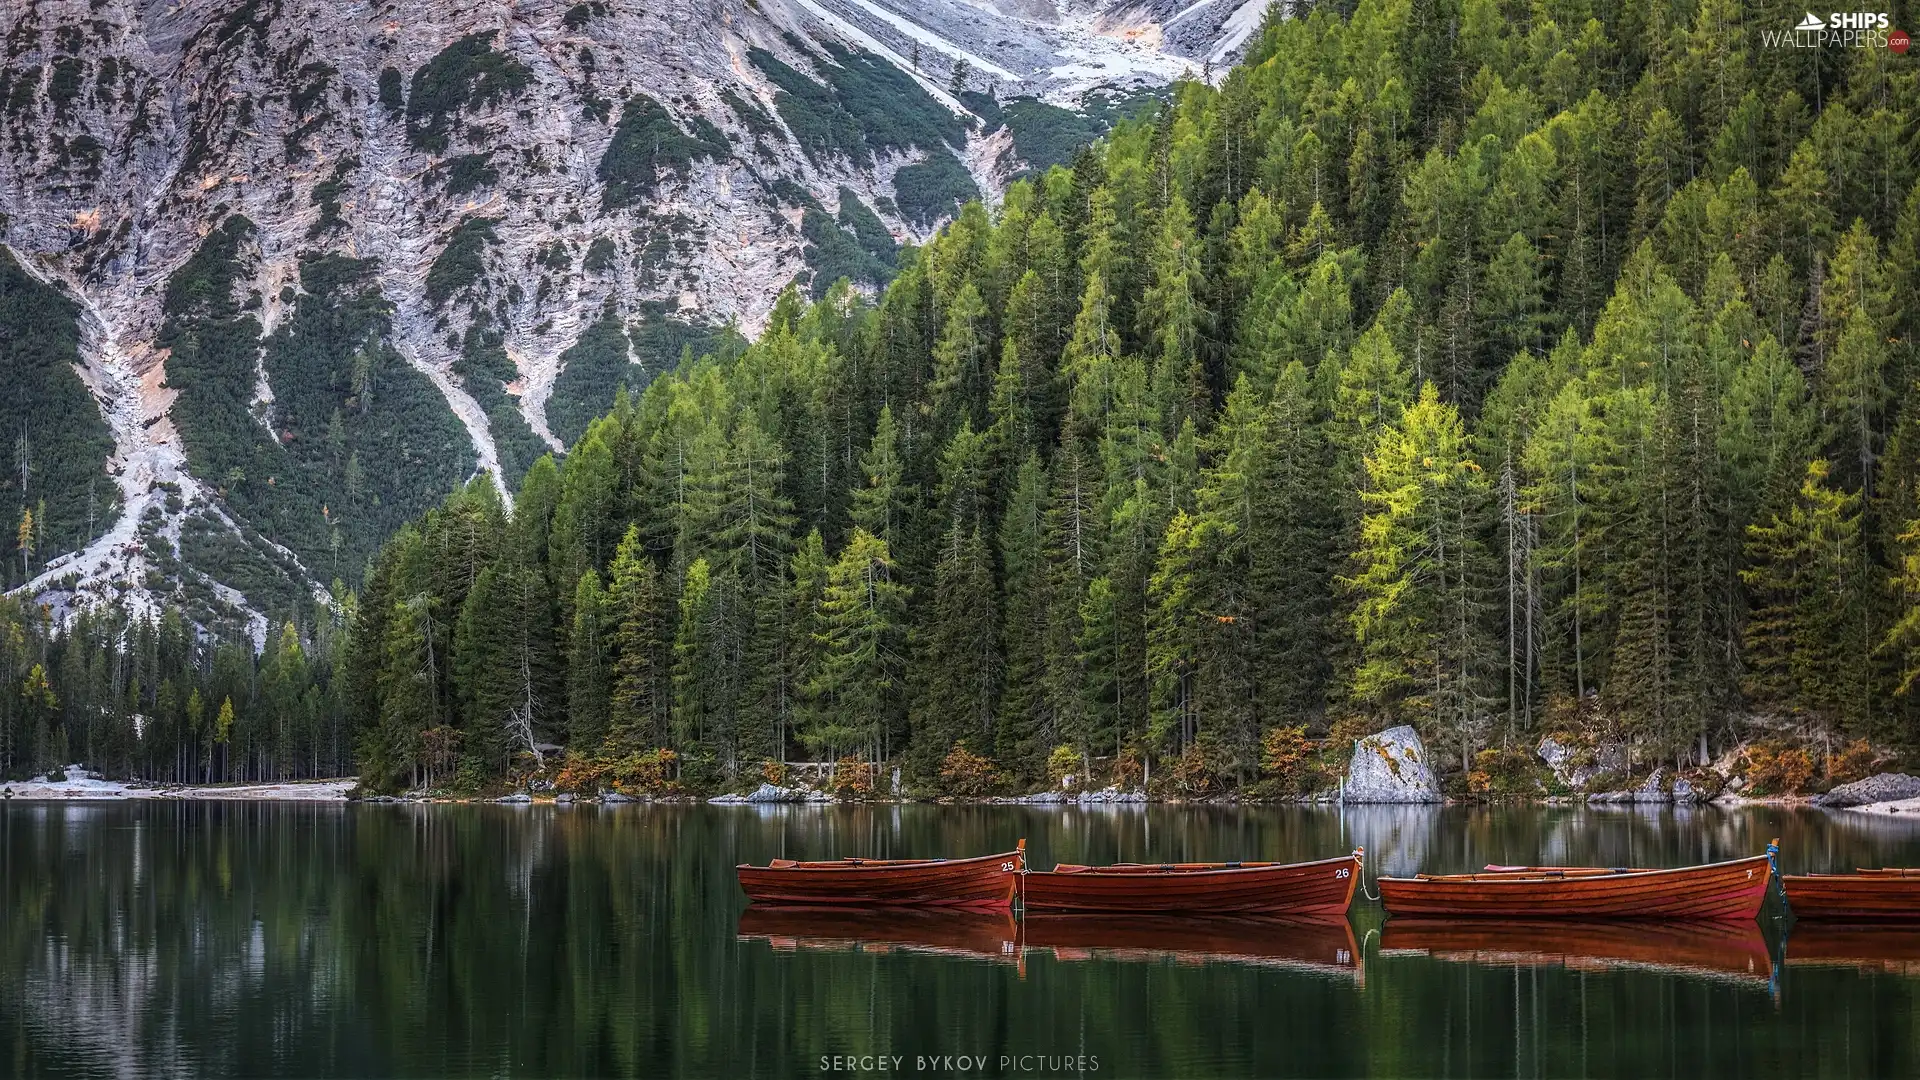 trees, South Tyrol, Pragser Wildsee Lake, Dolomites Mountains, Italy, viewes, boats